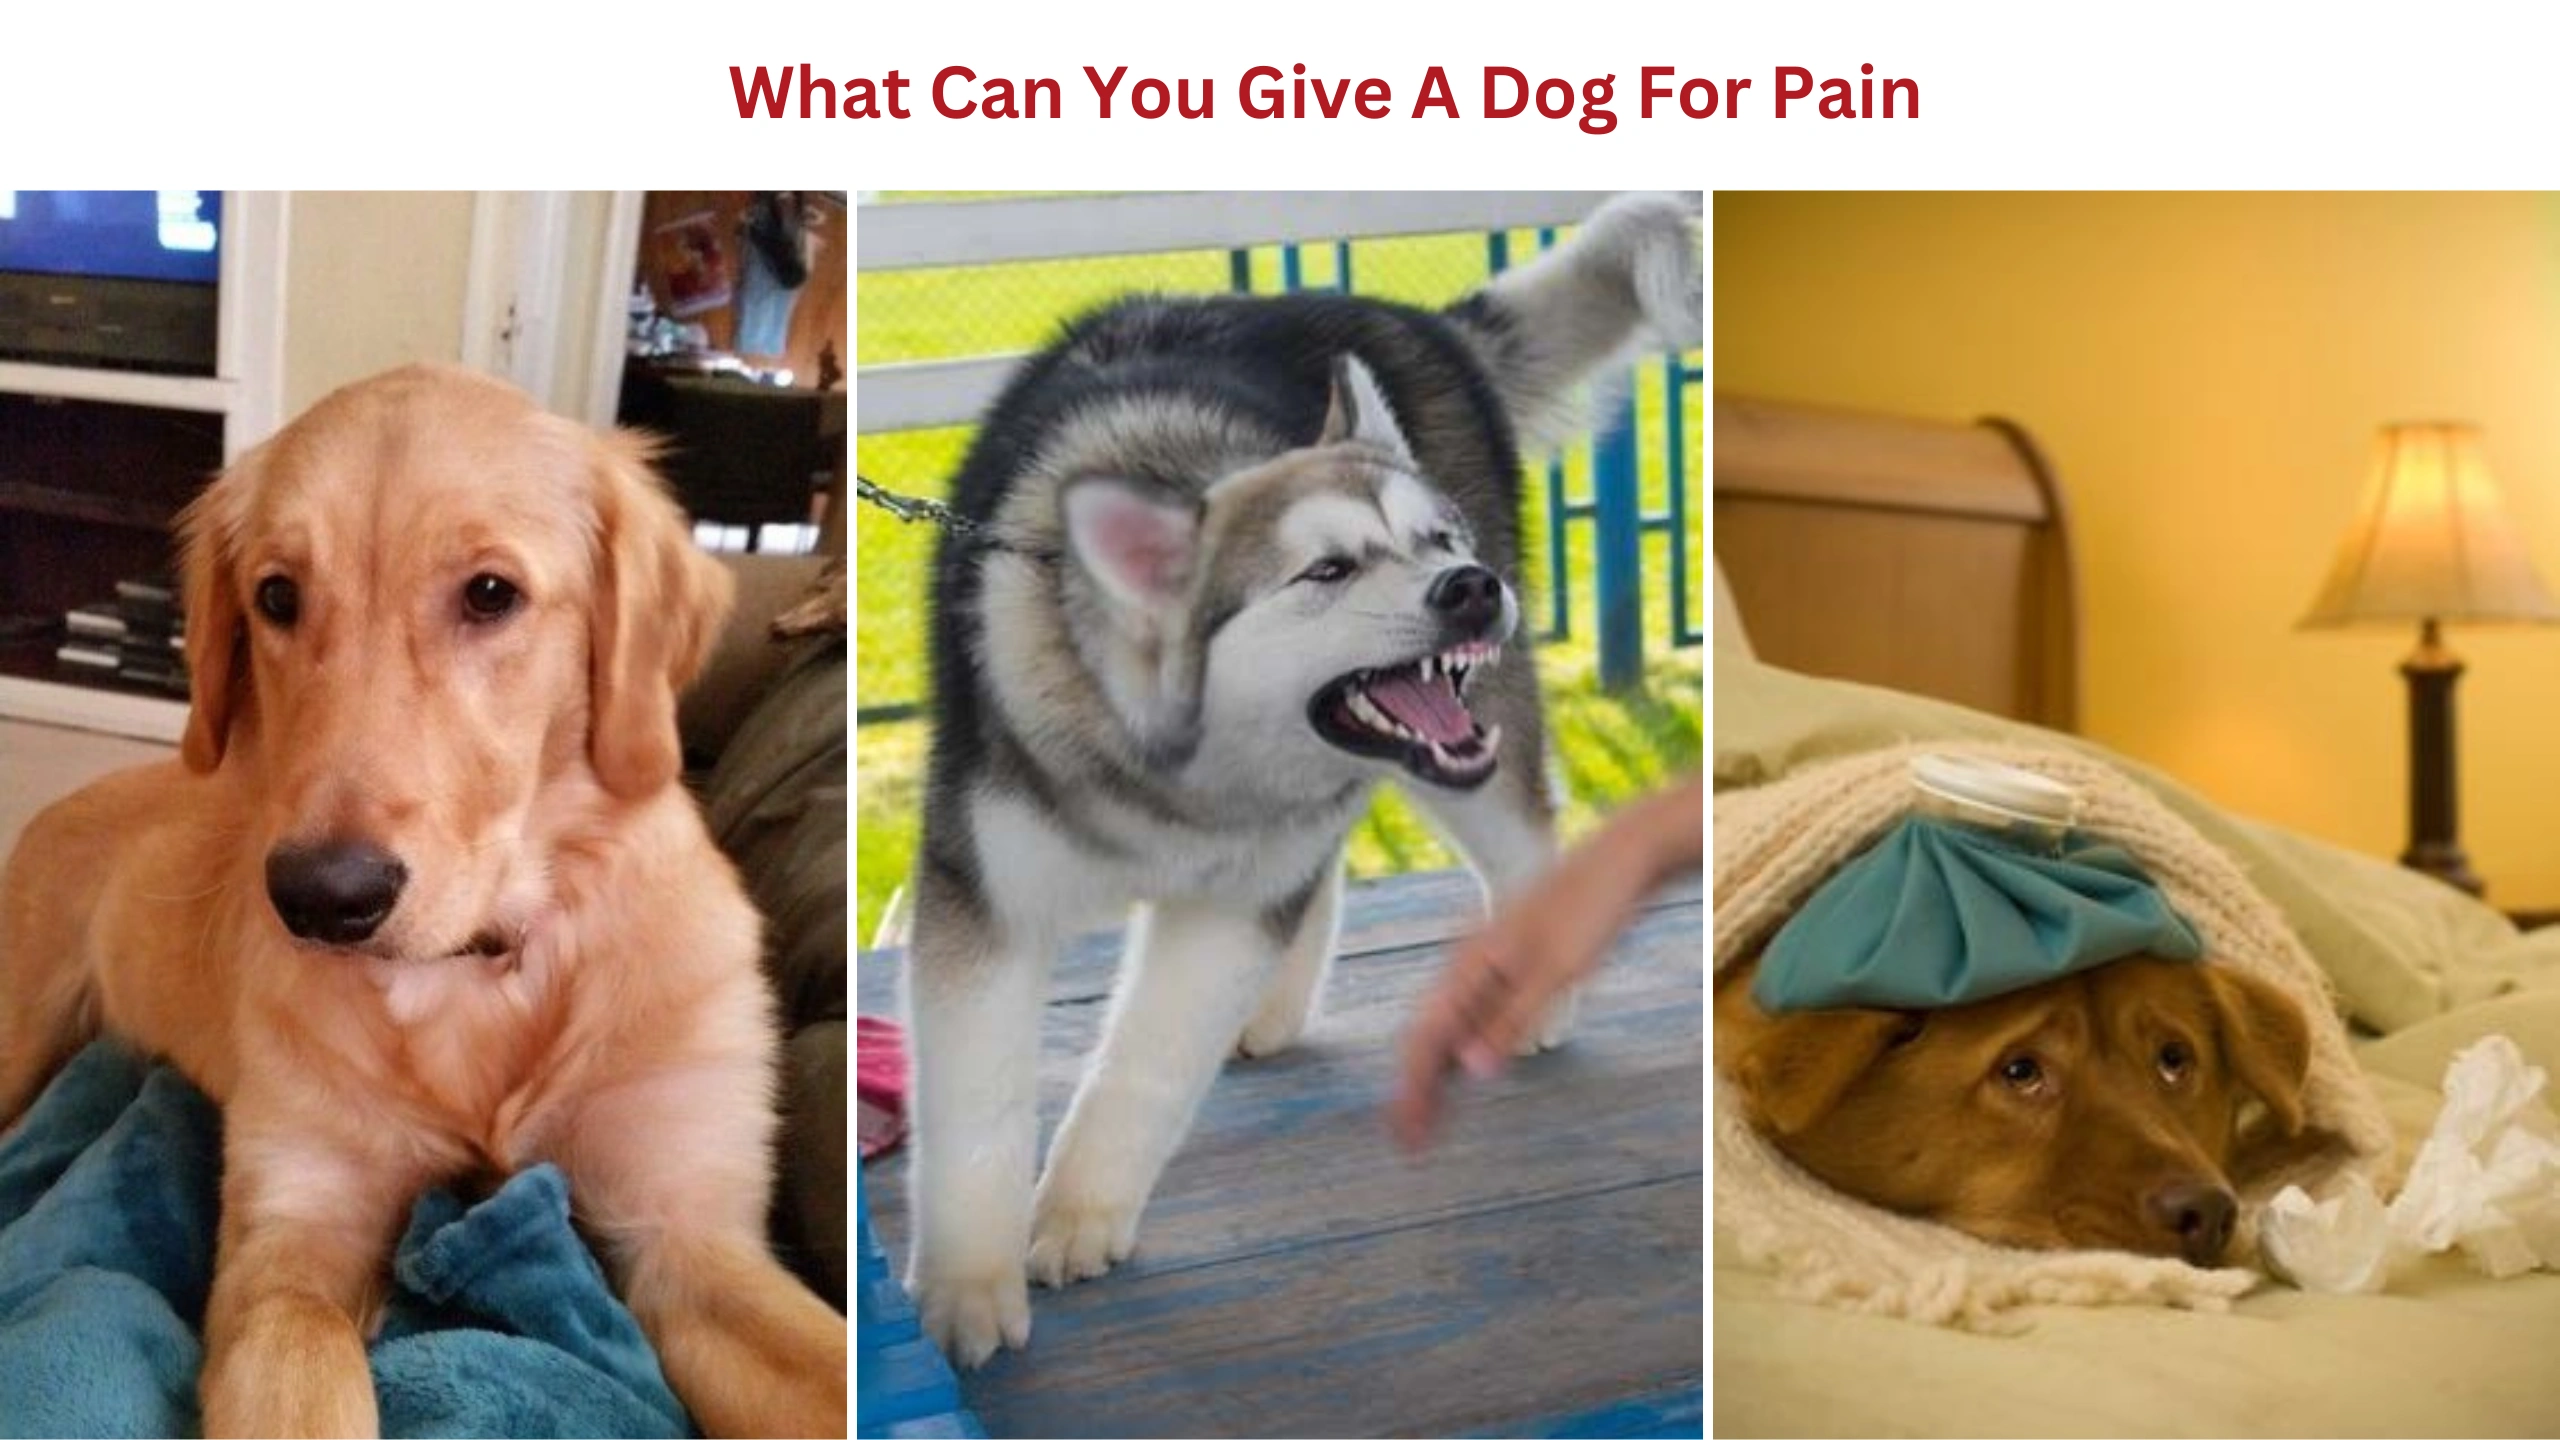 What can you give a dog for pain